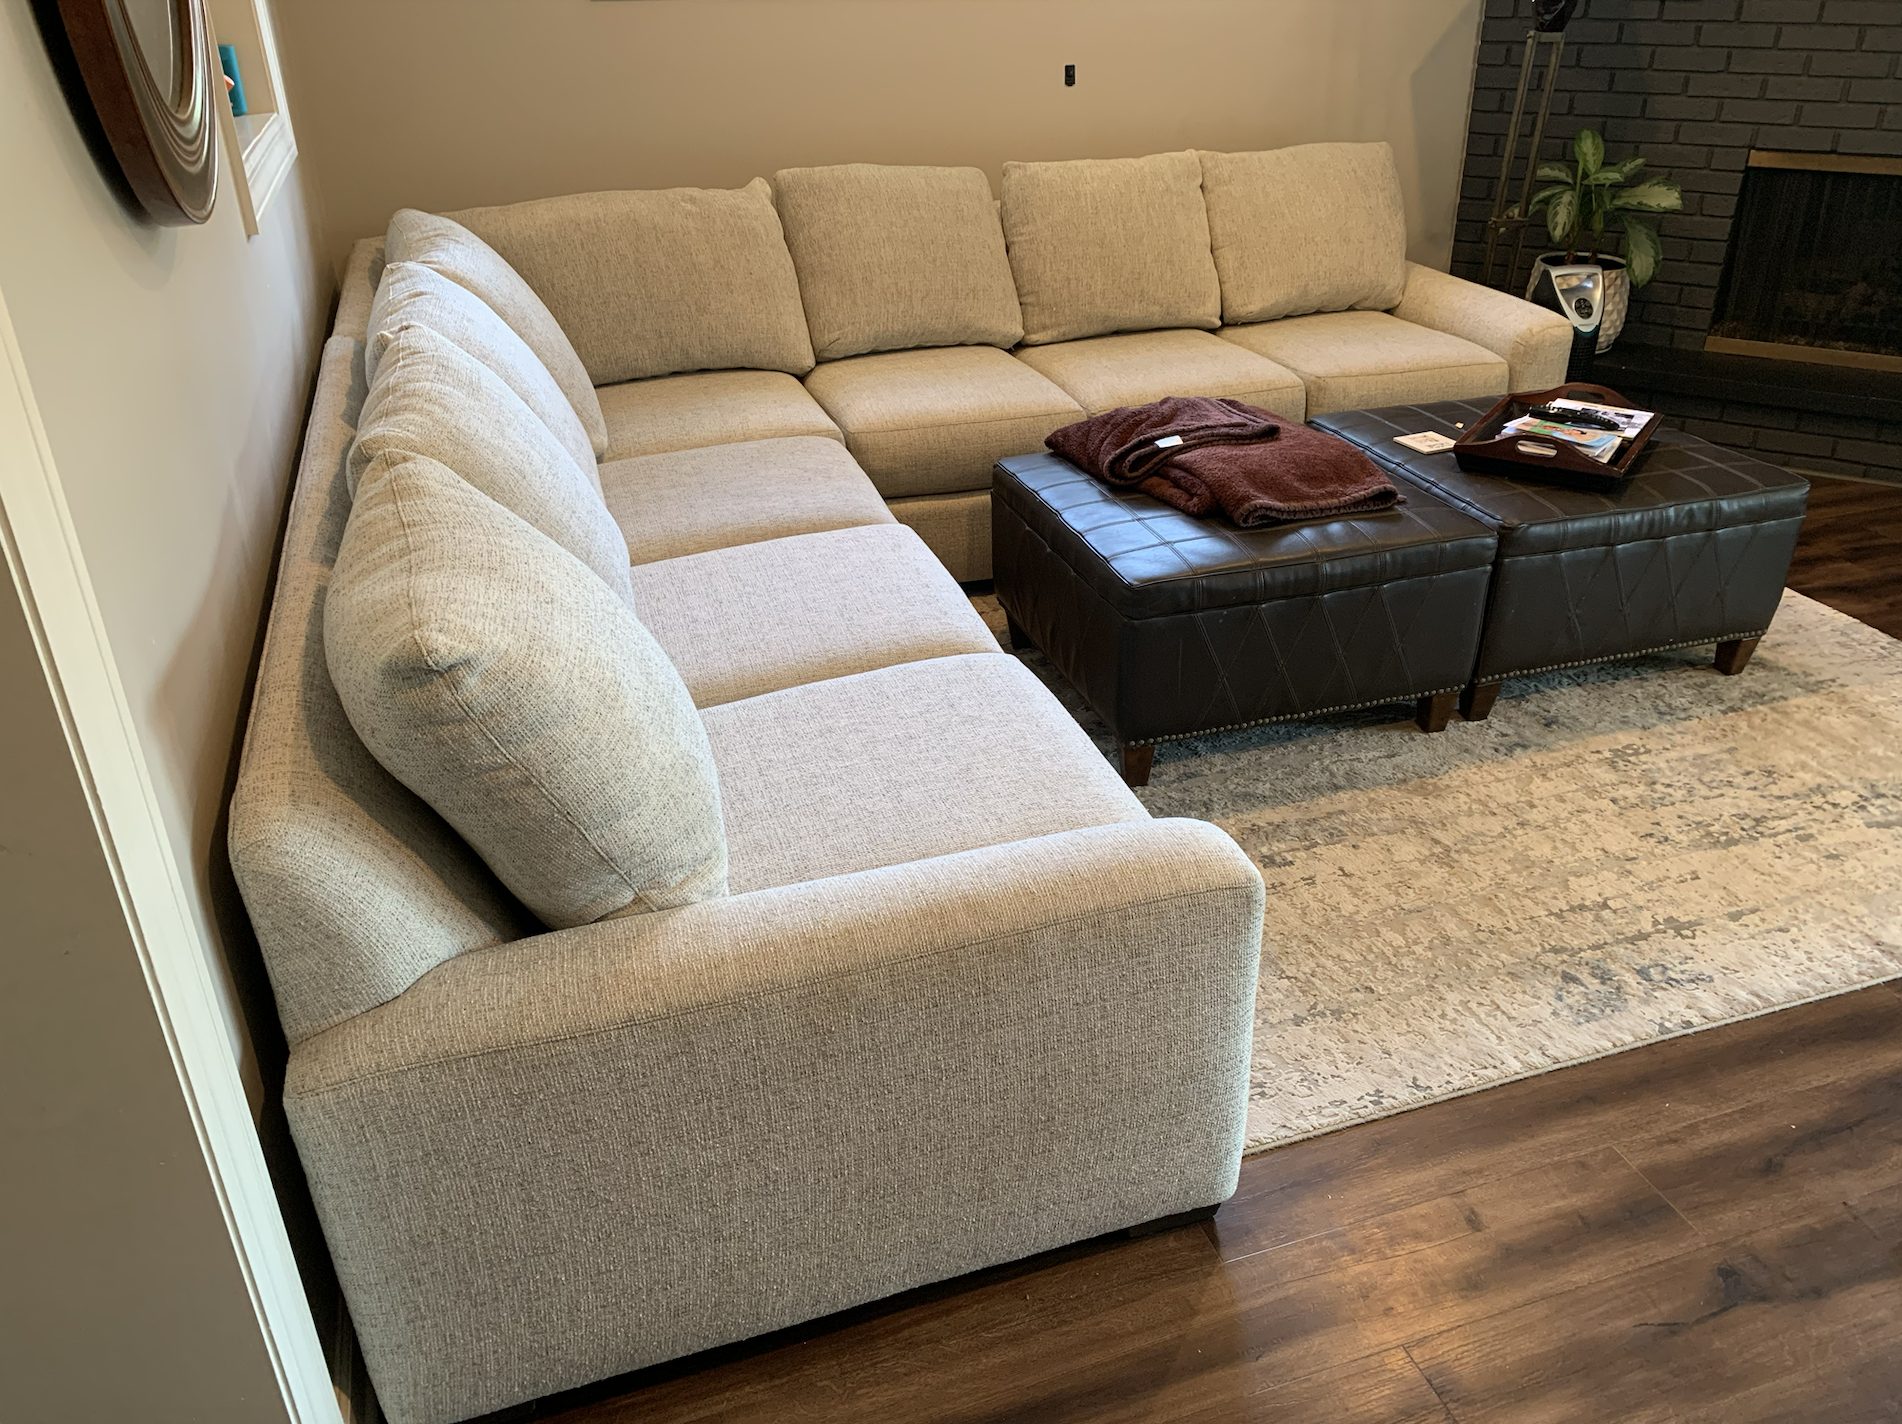 Upholstery Cleaning in Arlington Heights by Classic Touch Floor Care